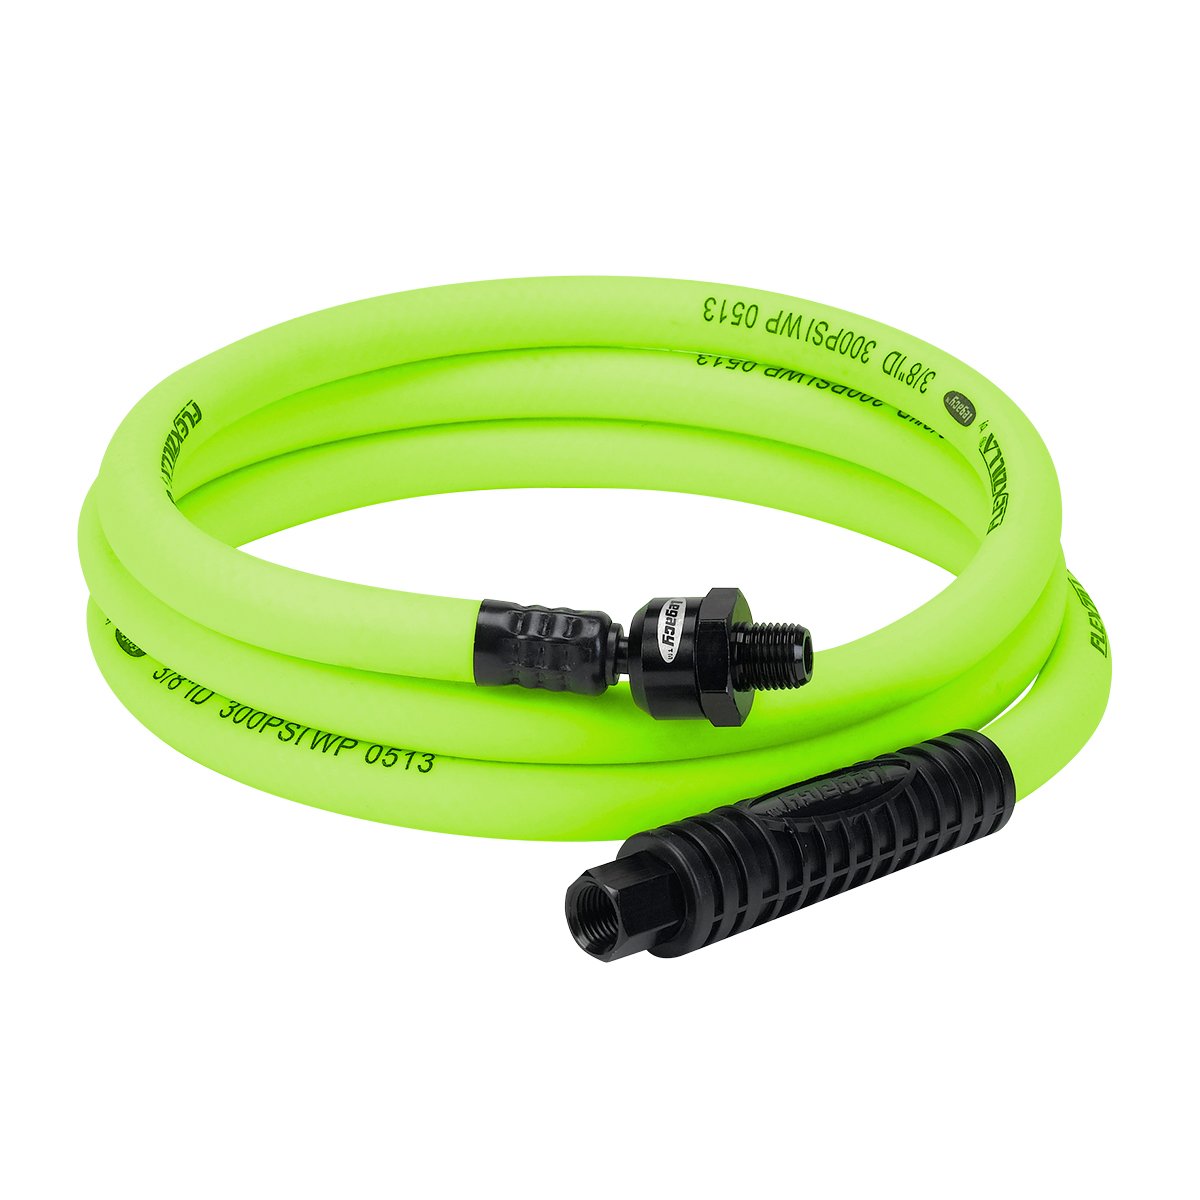 Flexzilla 3/8 X 25 Ft Polymer Air Hose Legacy Manufacturing, 60% OFF